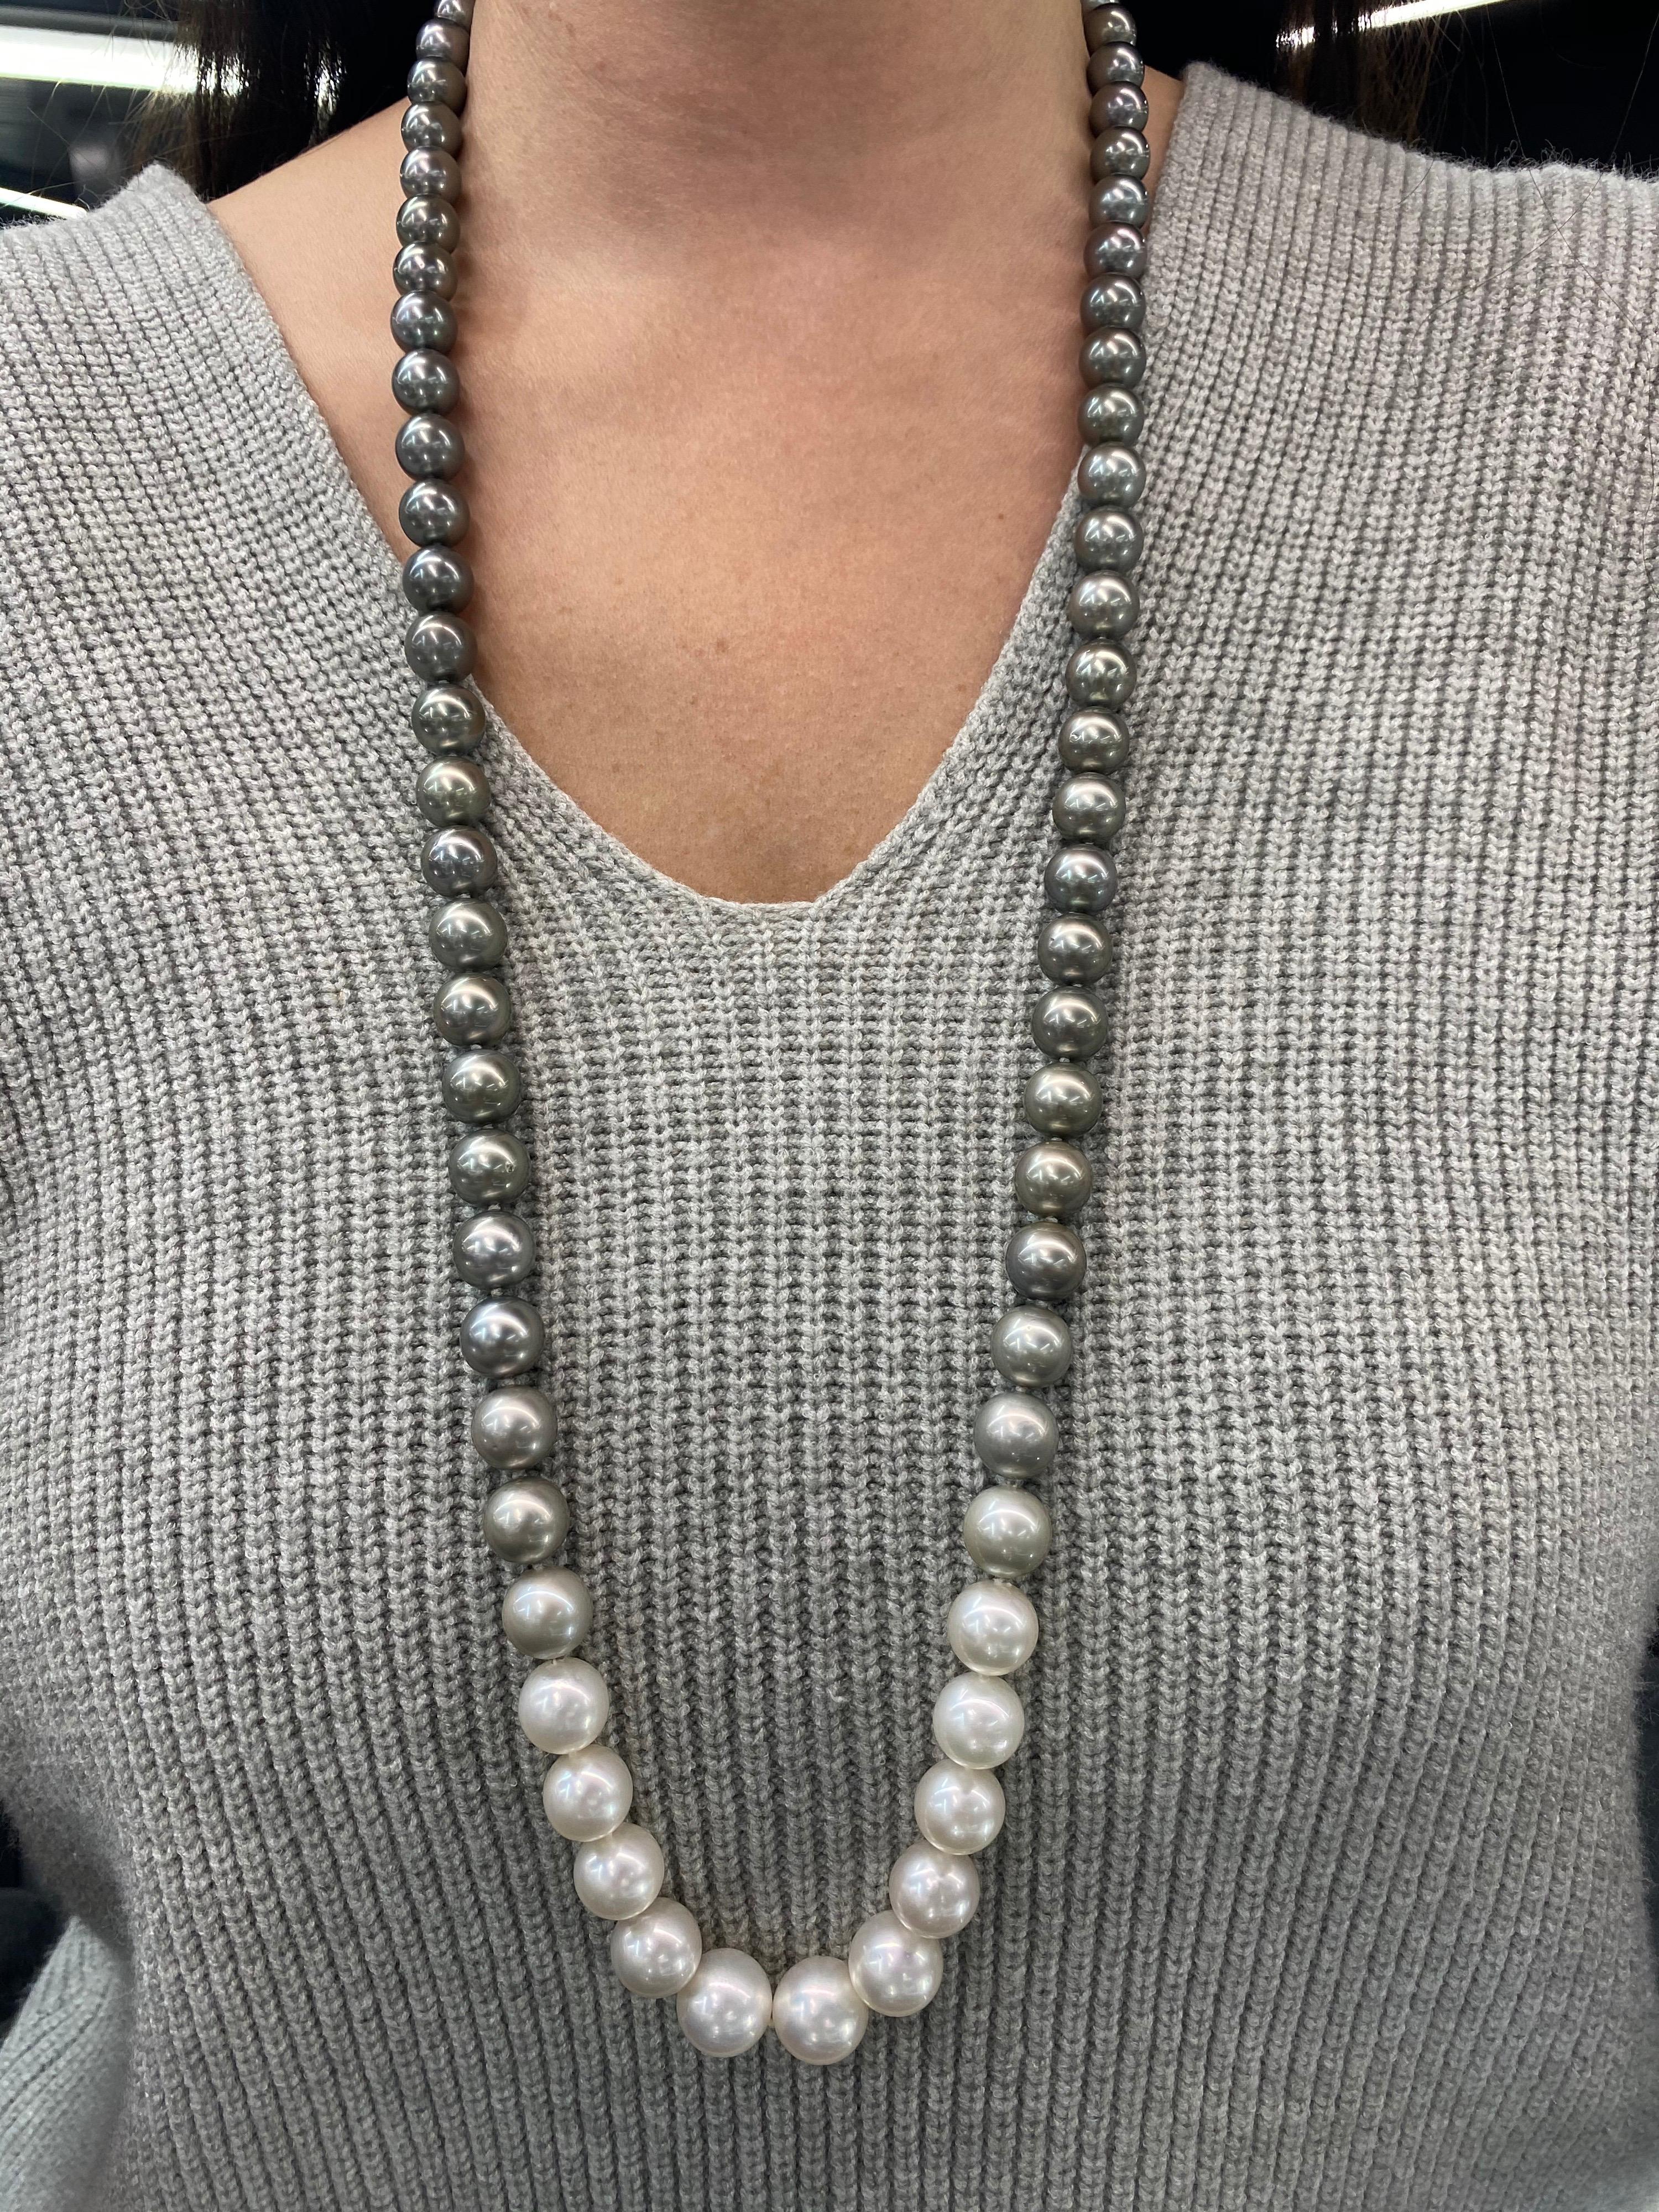 A lovely gorgeous opera ombre necklace featuring 73 South Sea & Tahitian pearls measuring 10.1-13.8 mm in a white gold diamond ball clasp.

Pearl quality: AAA
Pearl Luster: AAA Excellent
Nacre : Very Thick

Strand can be made to order, shortened or